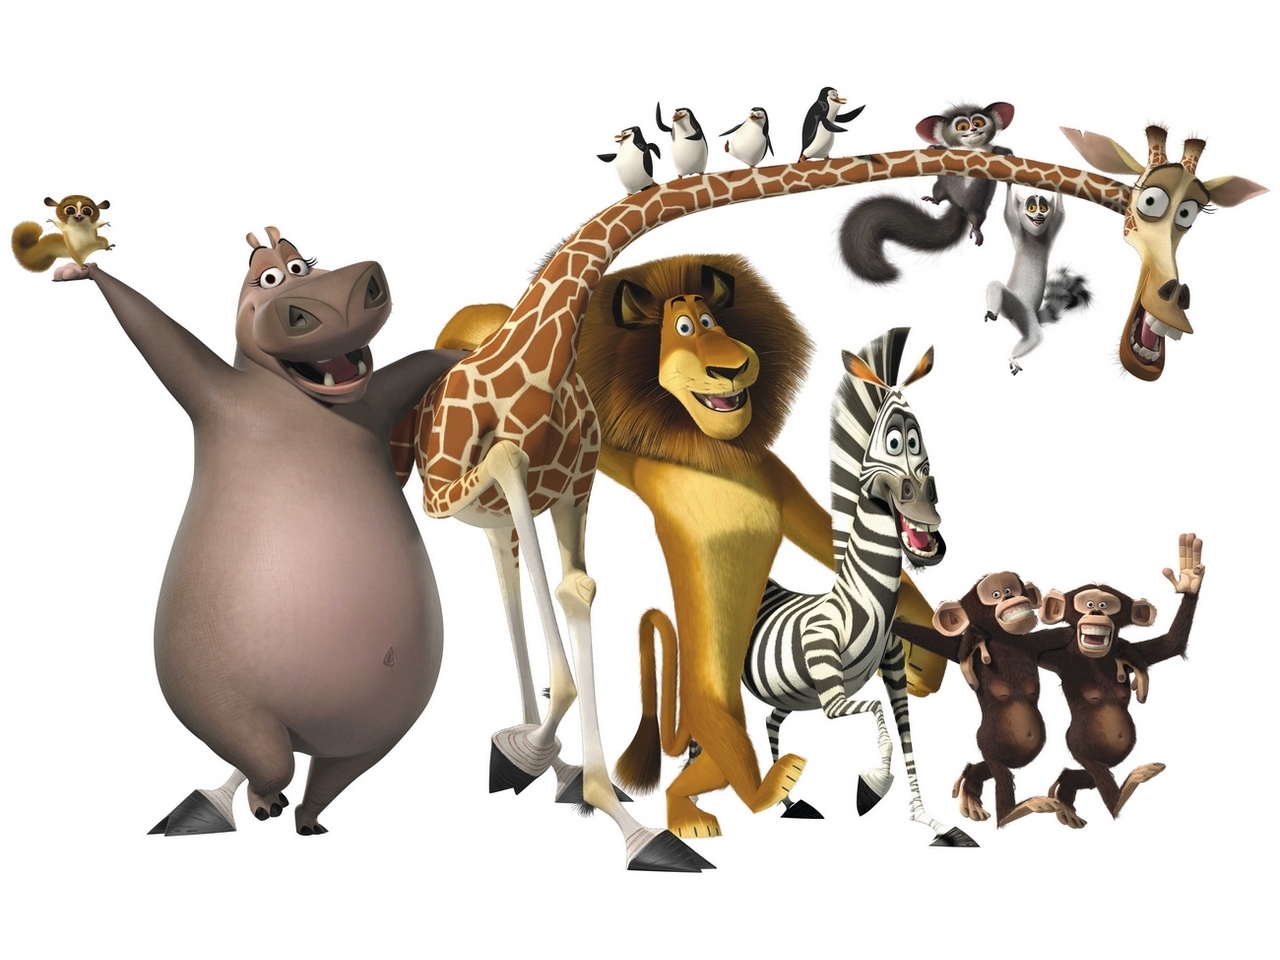 Clipart of Madagascar Characters free image